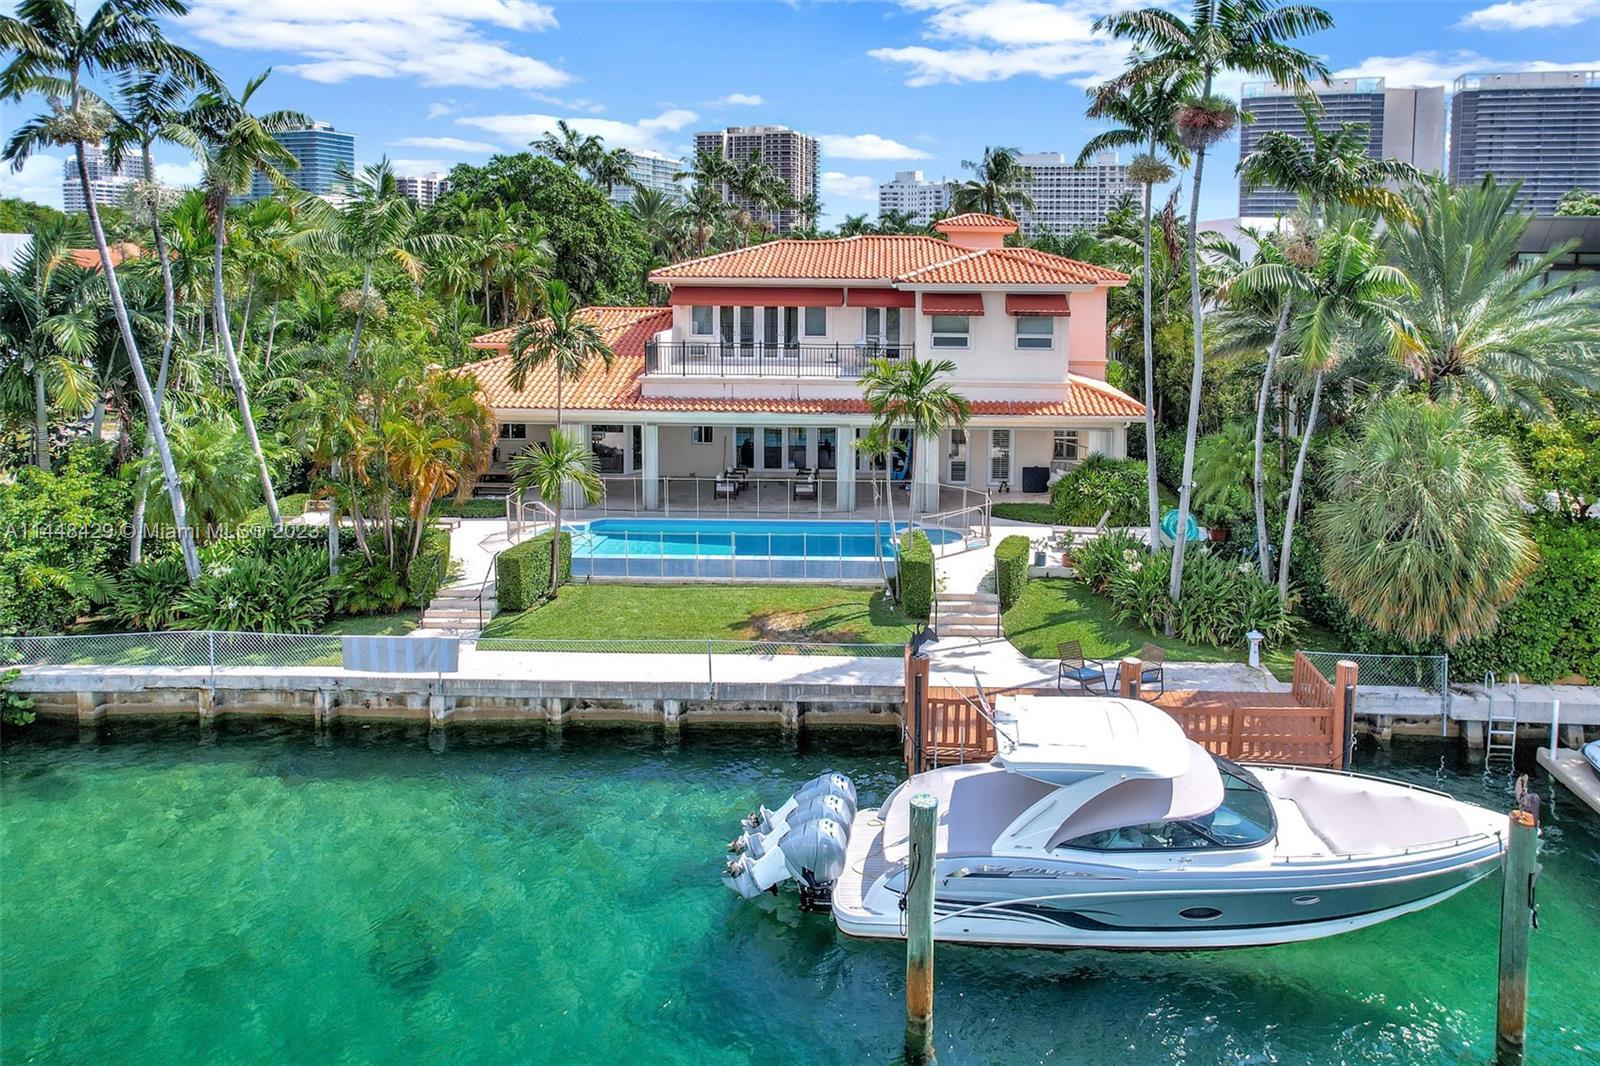 Palatial Mediterranean Estate almost half an Acre of Land on the water. Unique opportunity to purcha